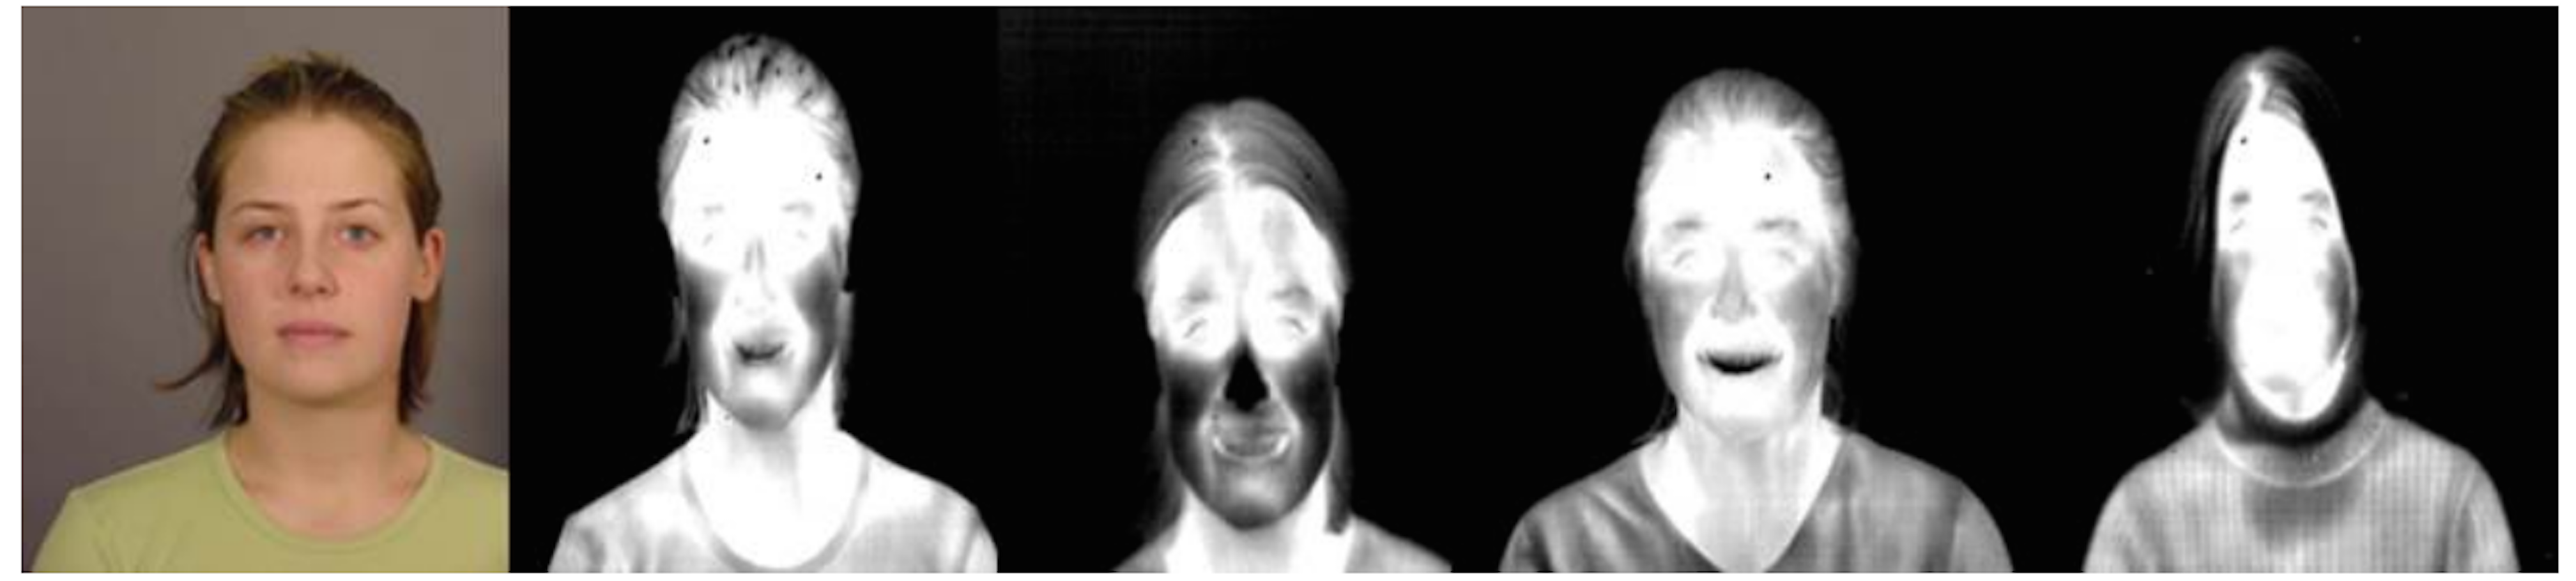 Deep neural networks for face recognition in darkness